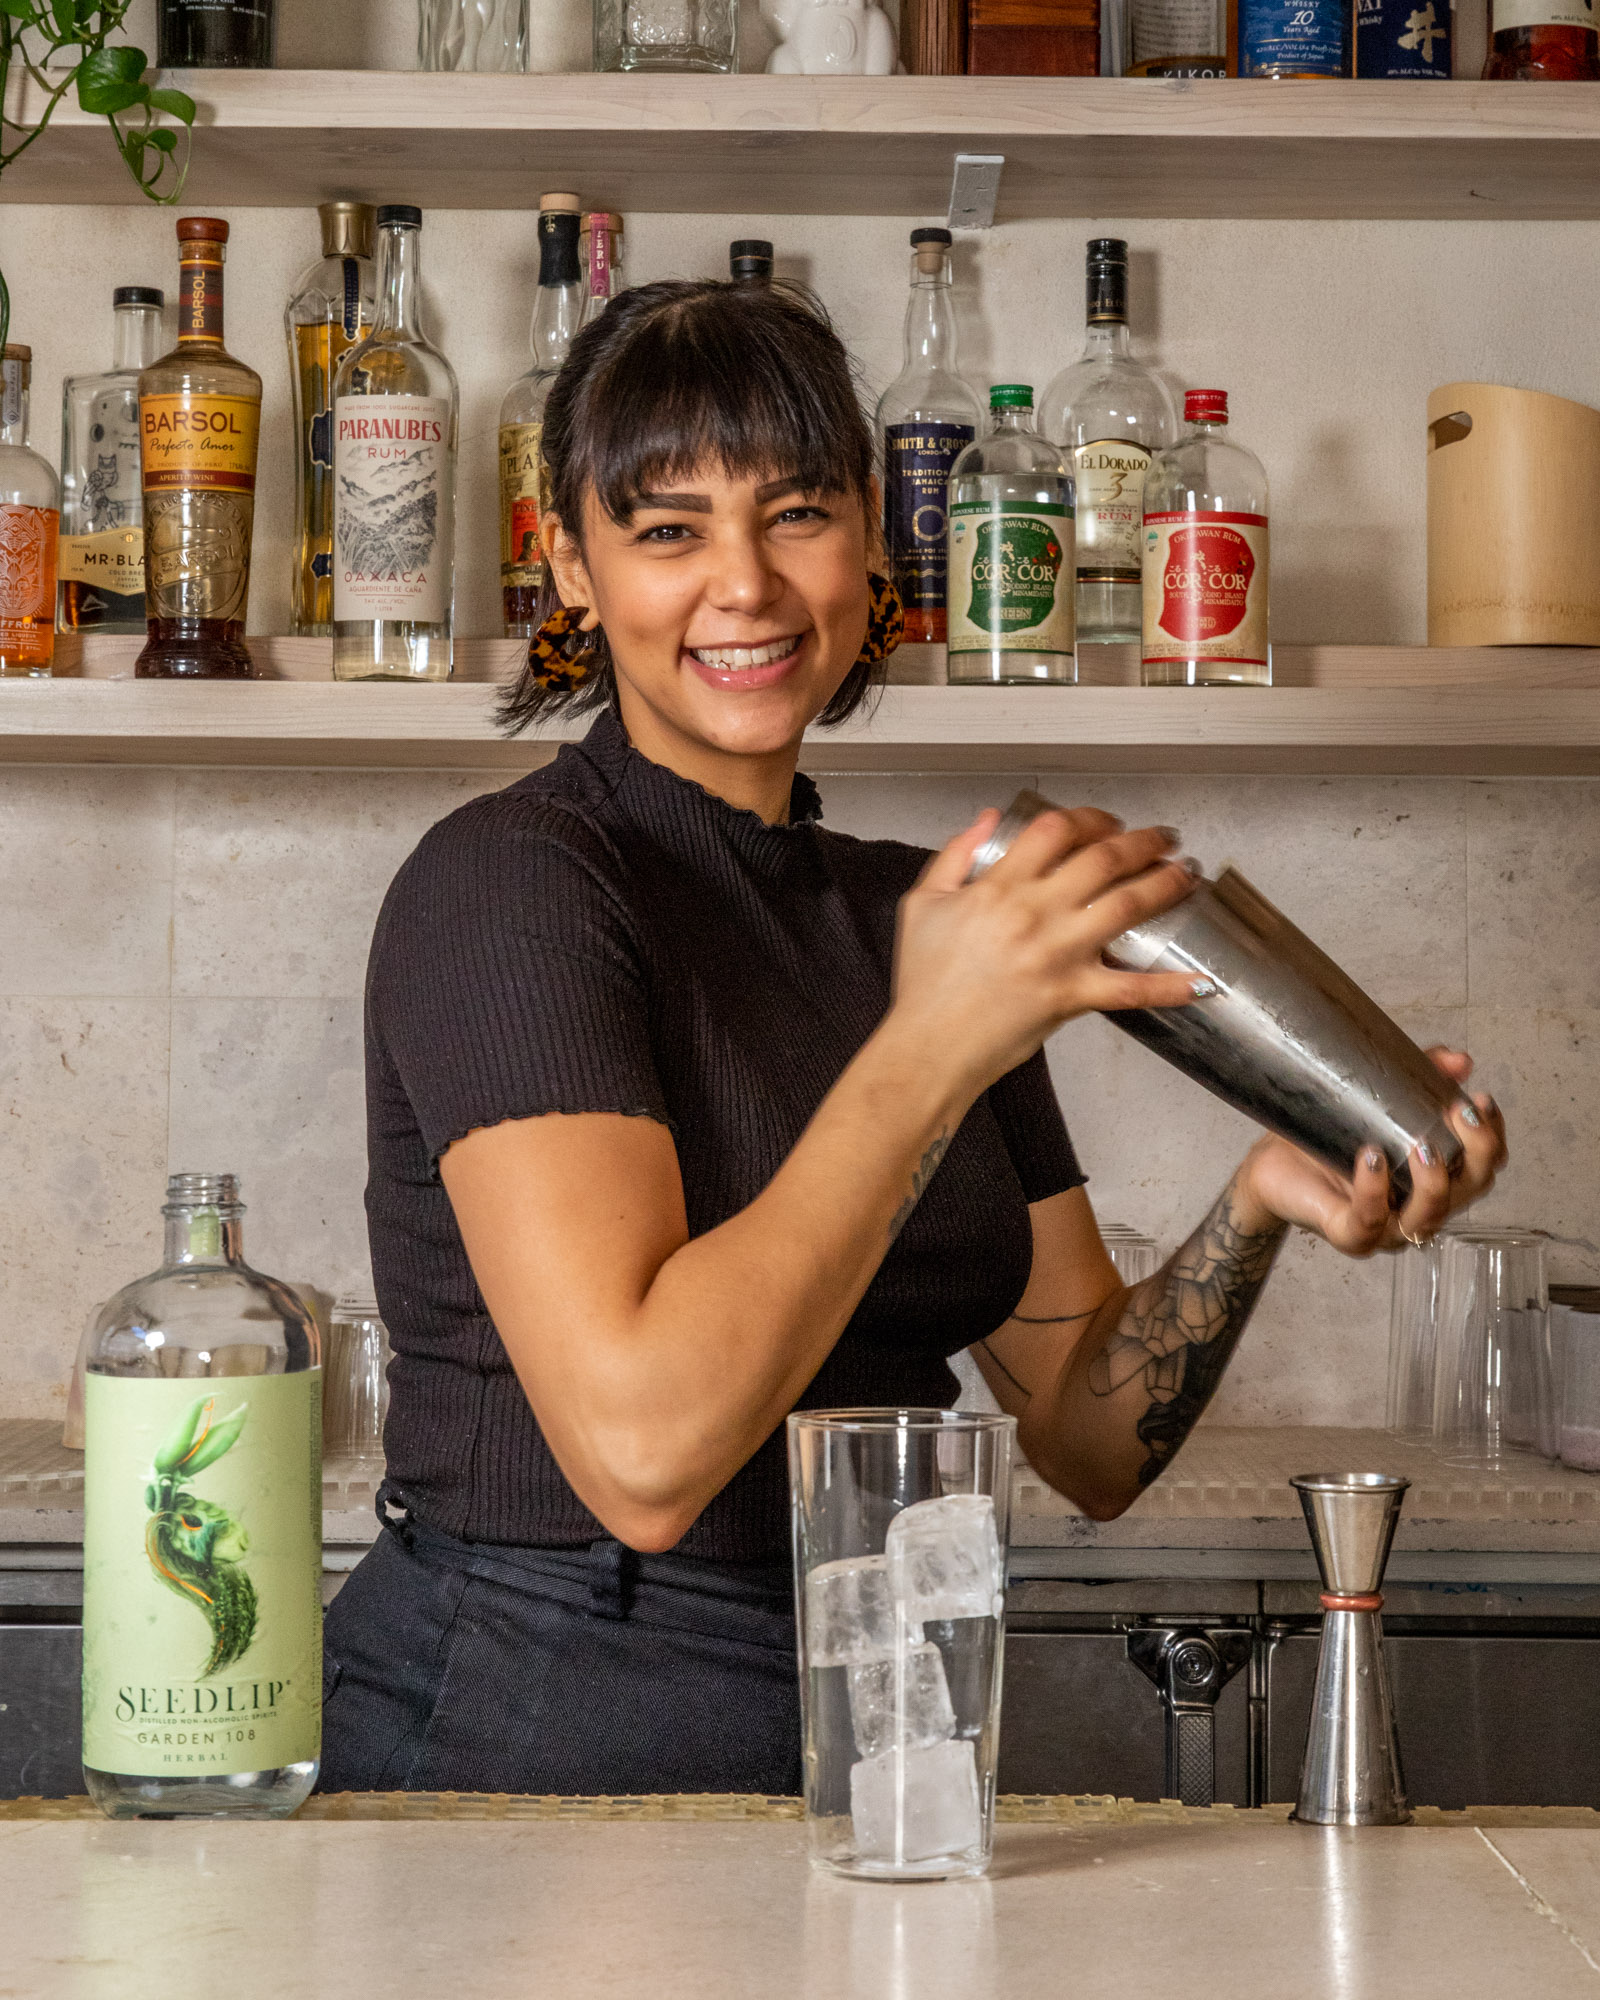 A happy smiling bartender shaking a cocktail